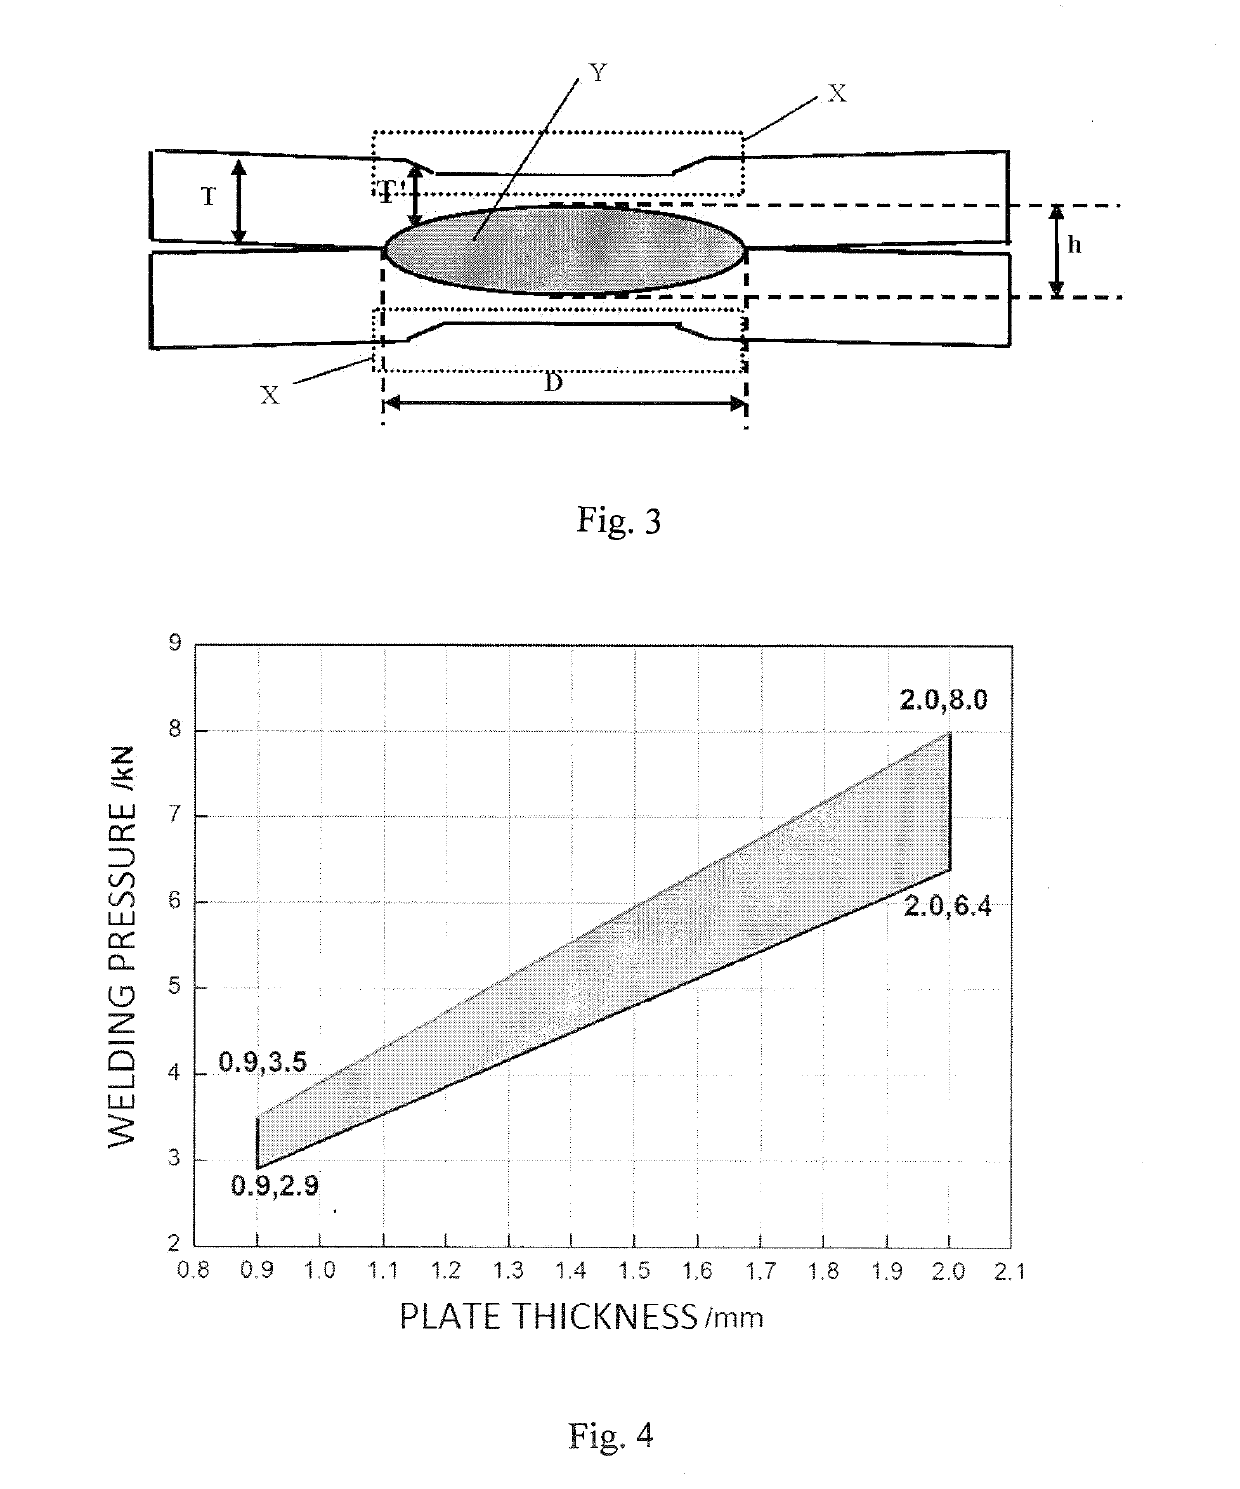 Method of resistance spot welding of galvanized high-strength steel with good joint performance